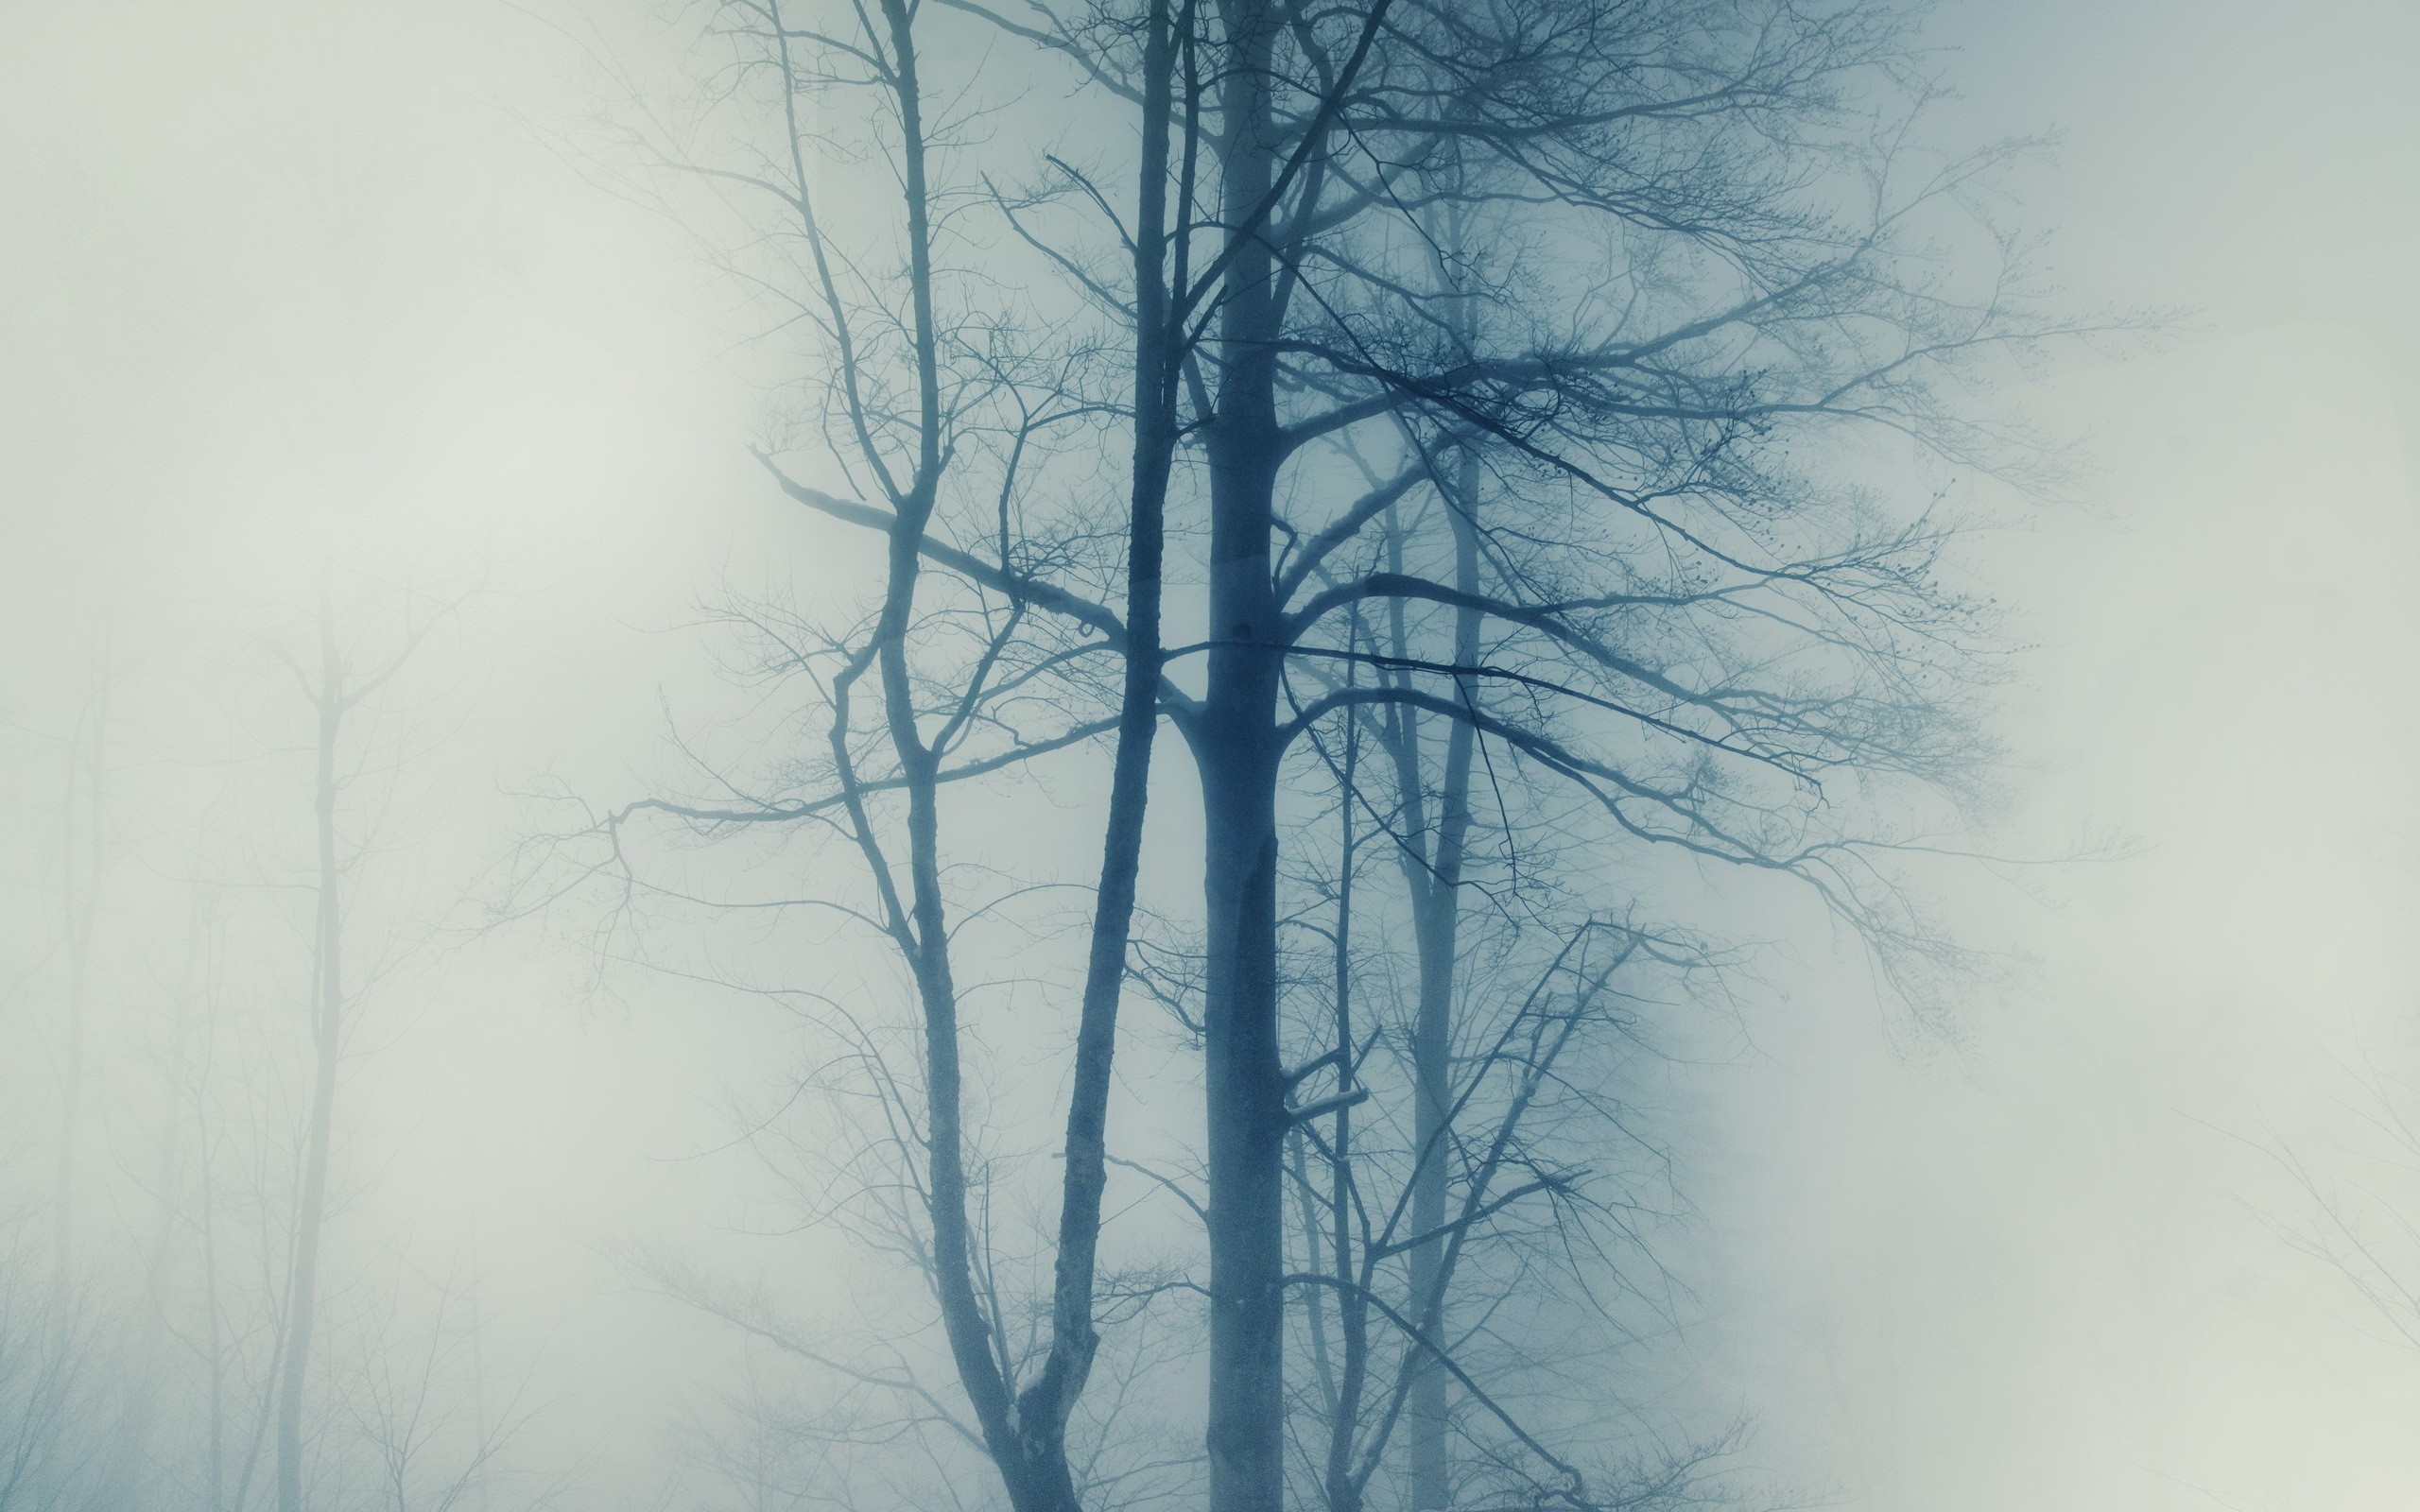 General 2560x1600 photography nature trees mist winter